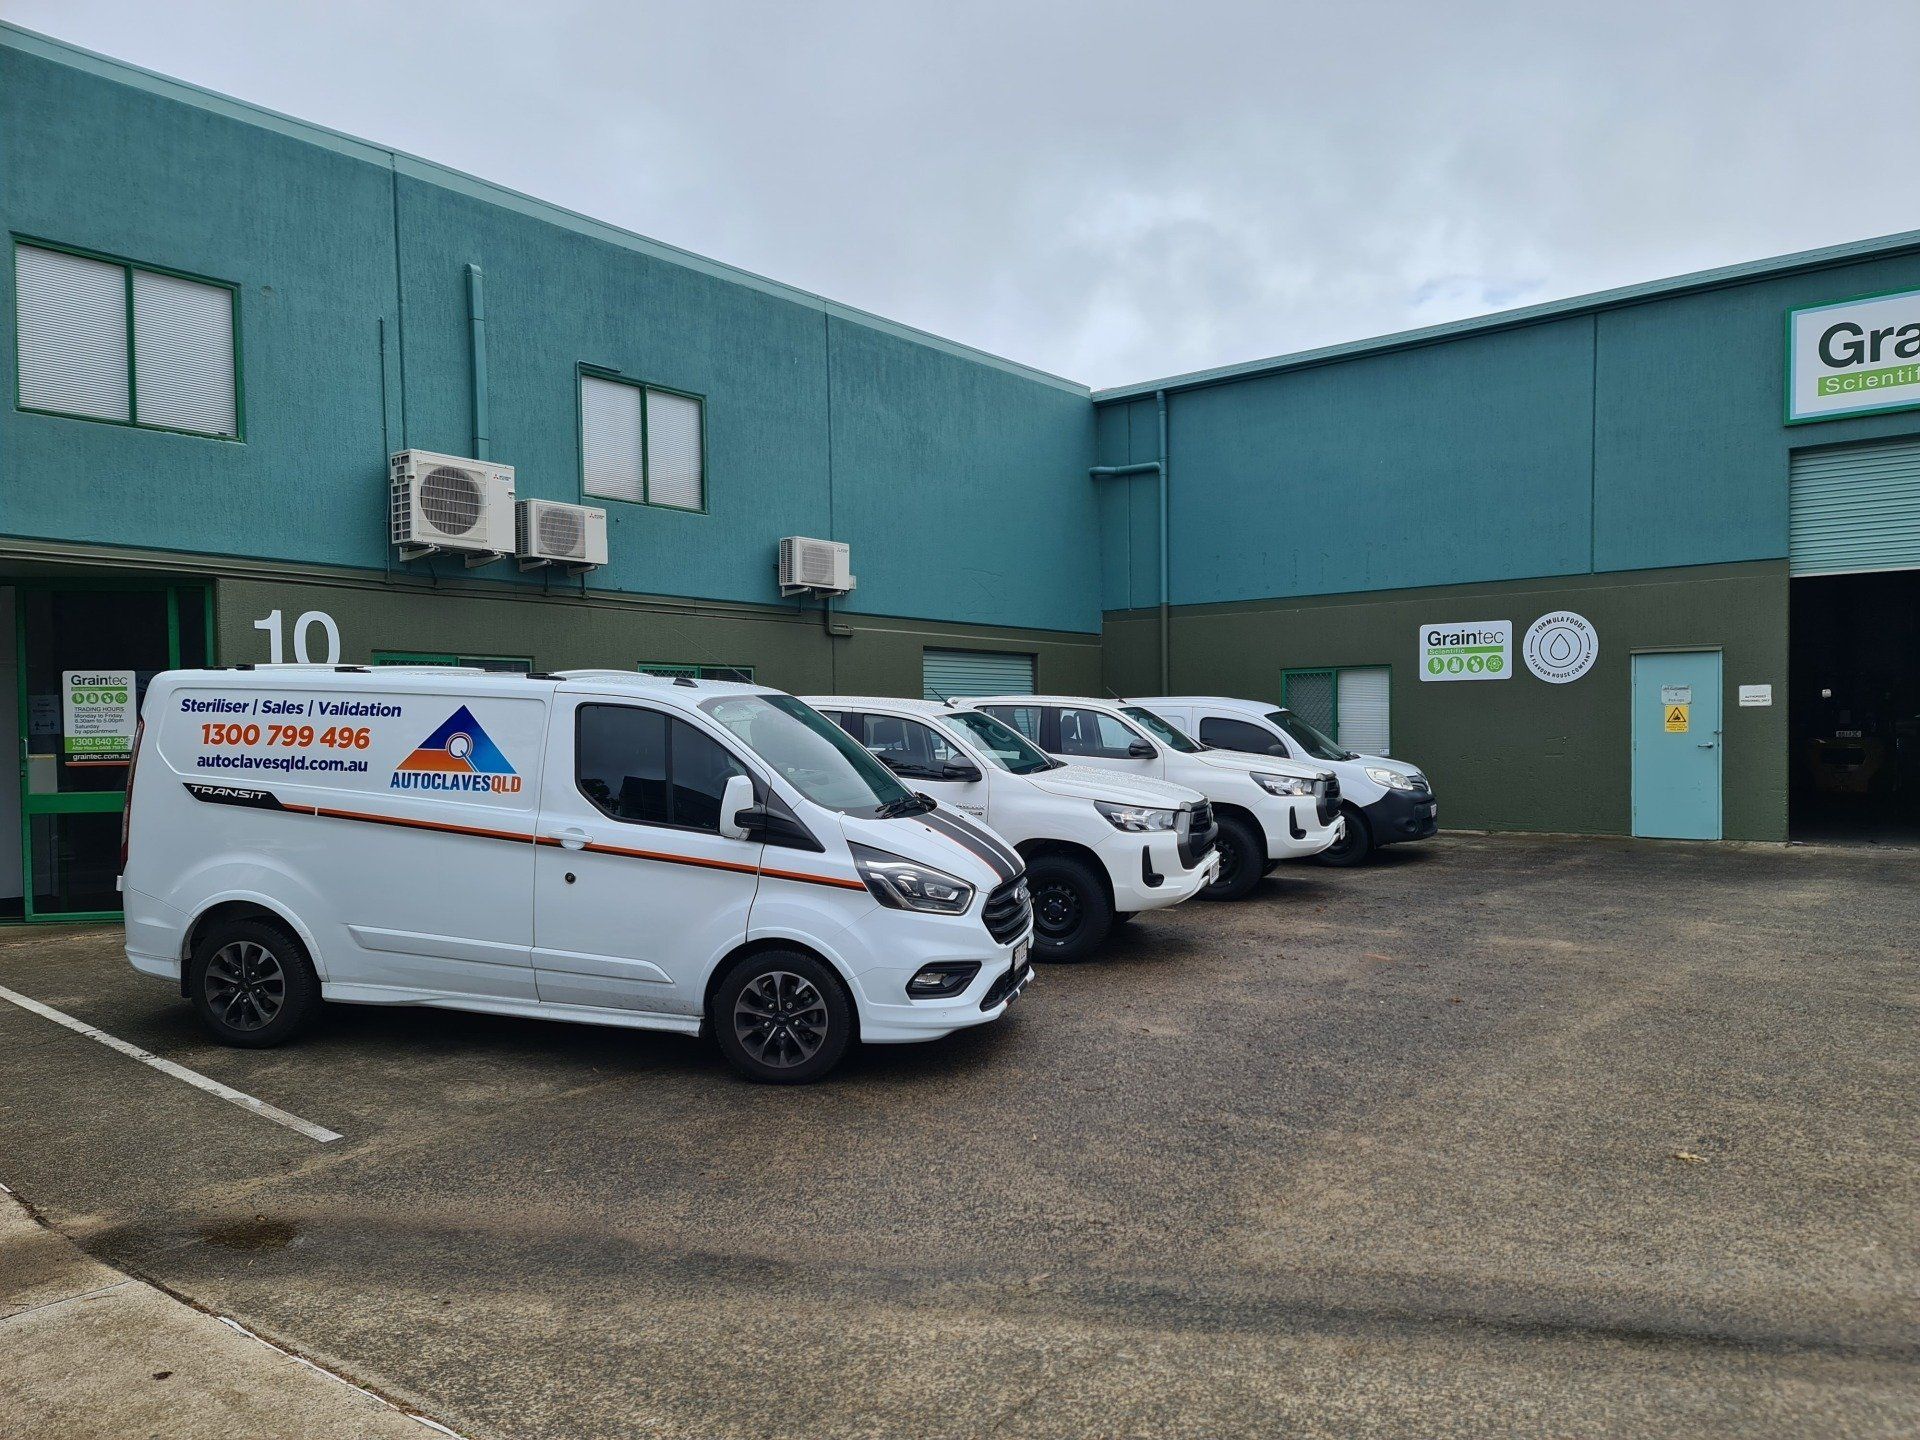 White technician's van for autoclave validations, services and repairs.